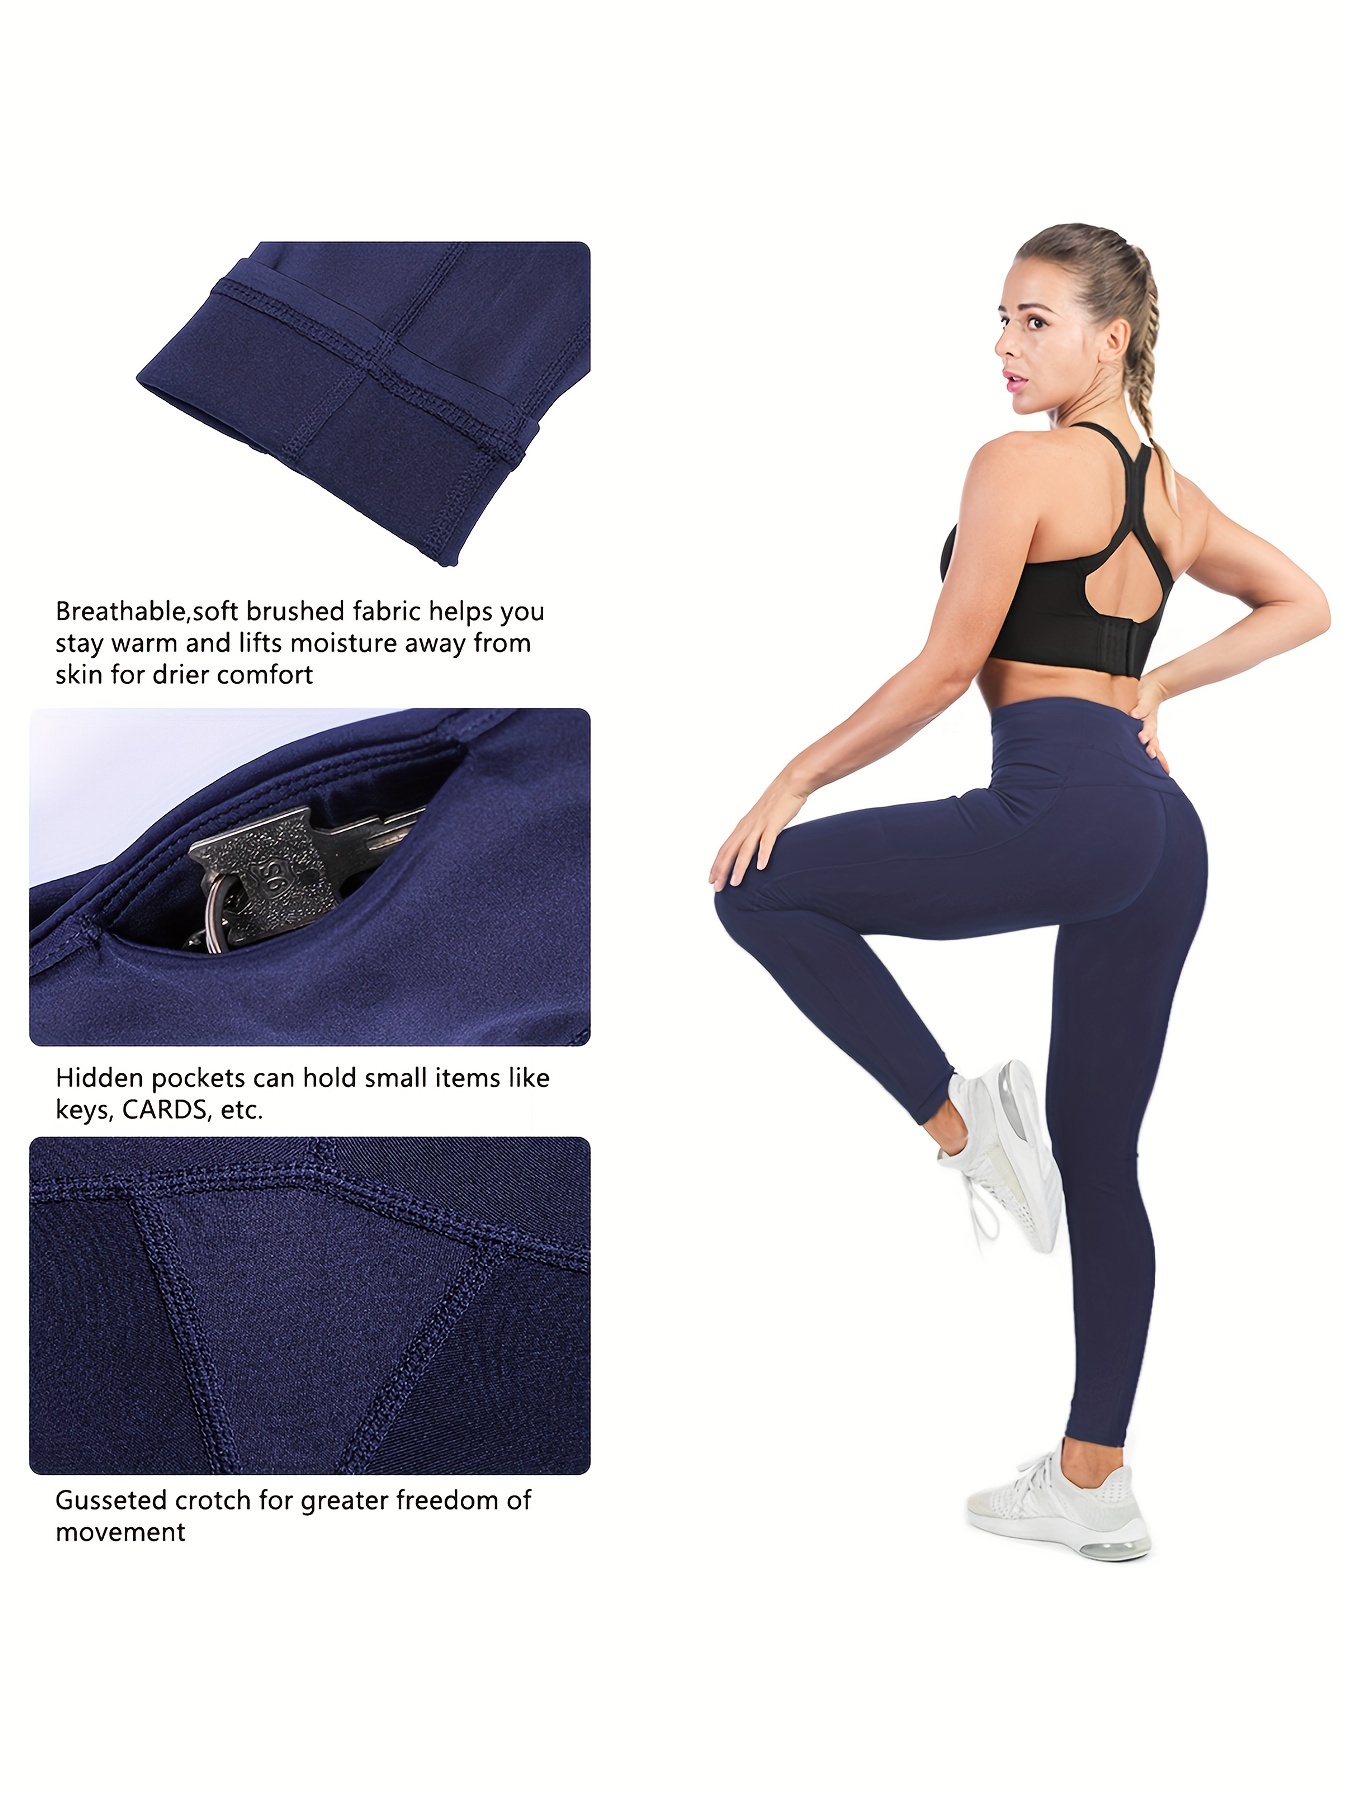 Fleece Lined Sport Pants for Women with Pockets, Winter Workout